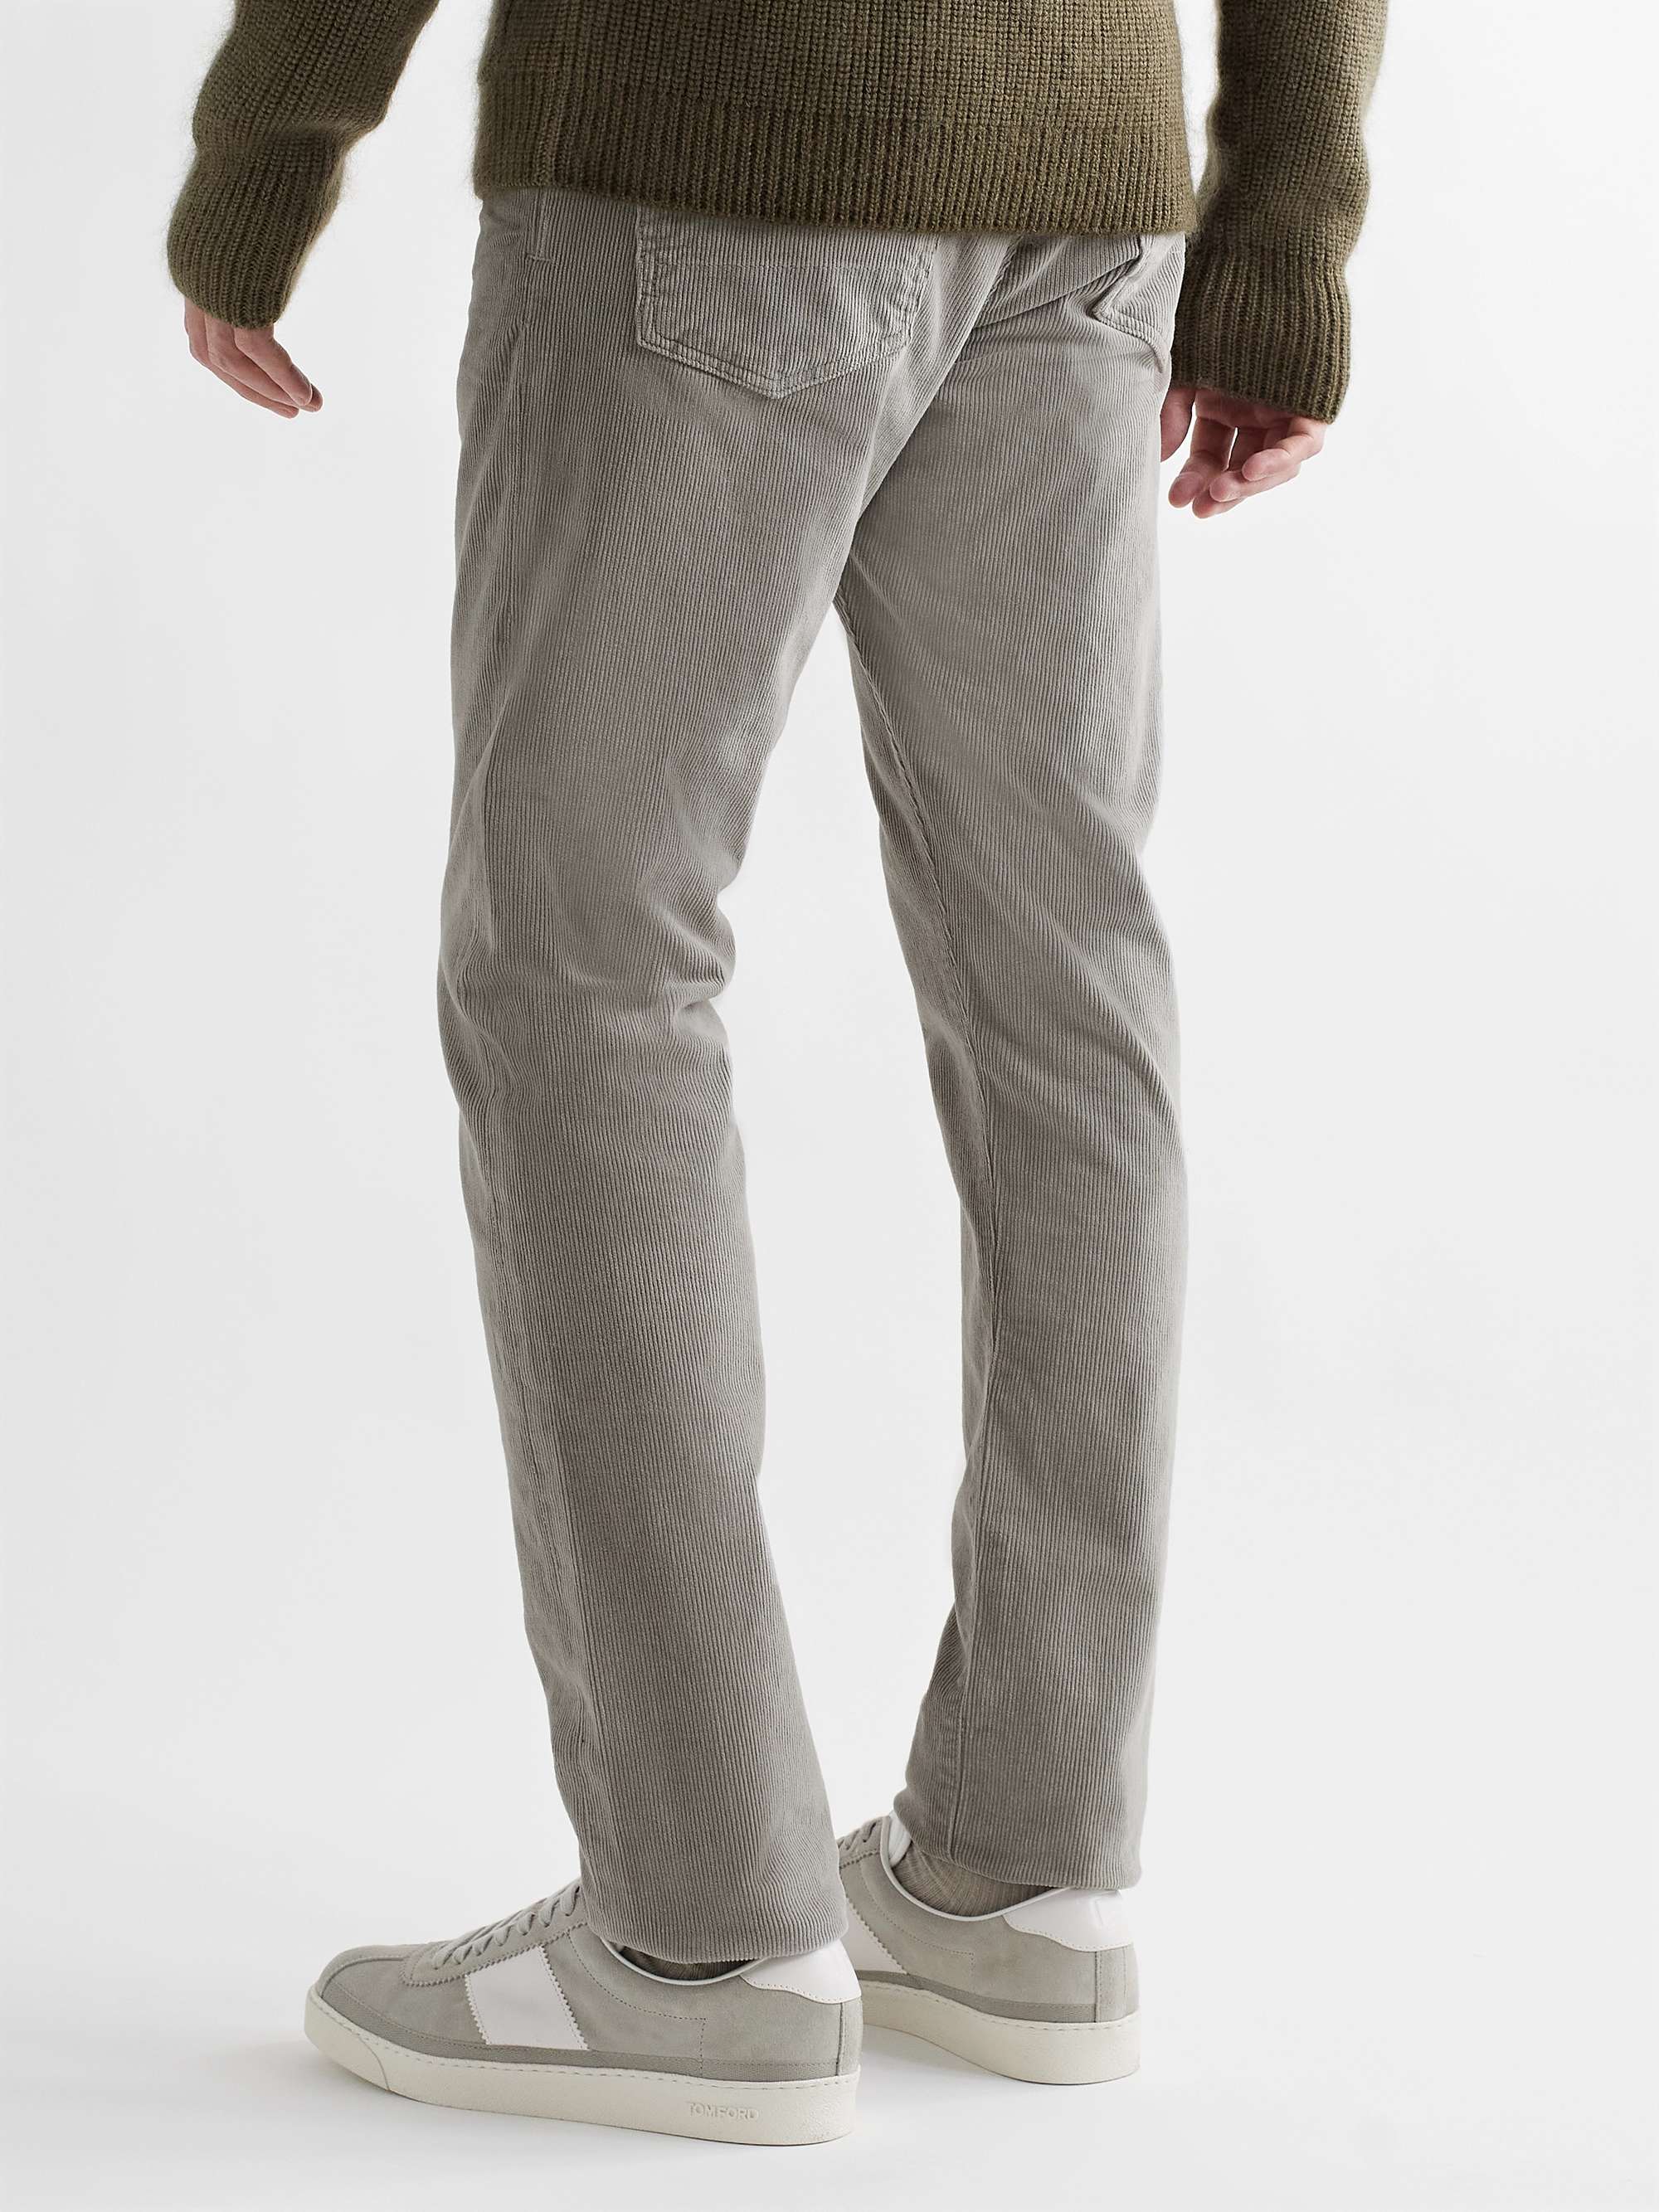 TOM FORD Straight-Leg Garment-Dyed Stretch-Cotton Corduroy Trousers